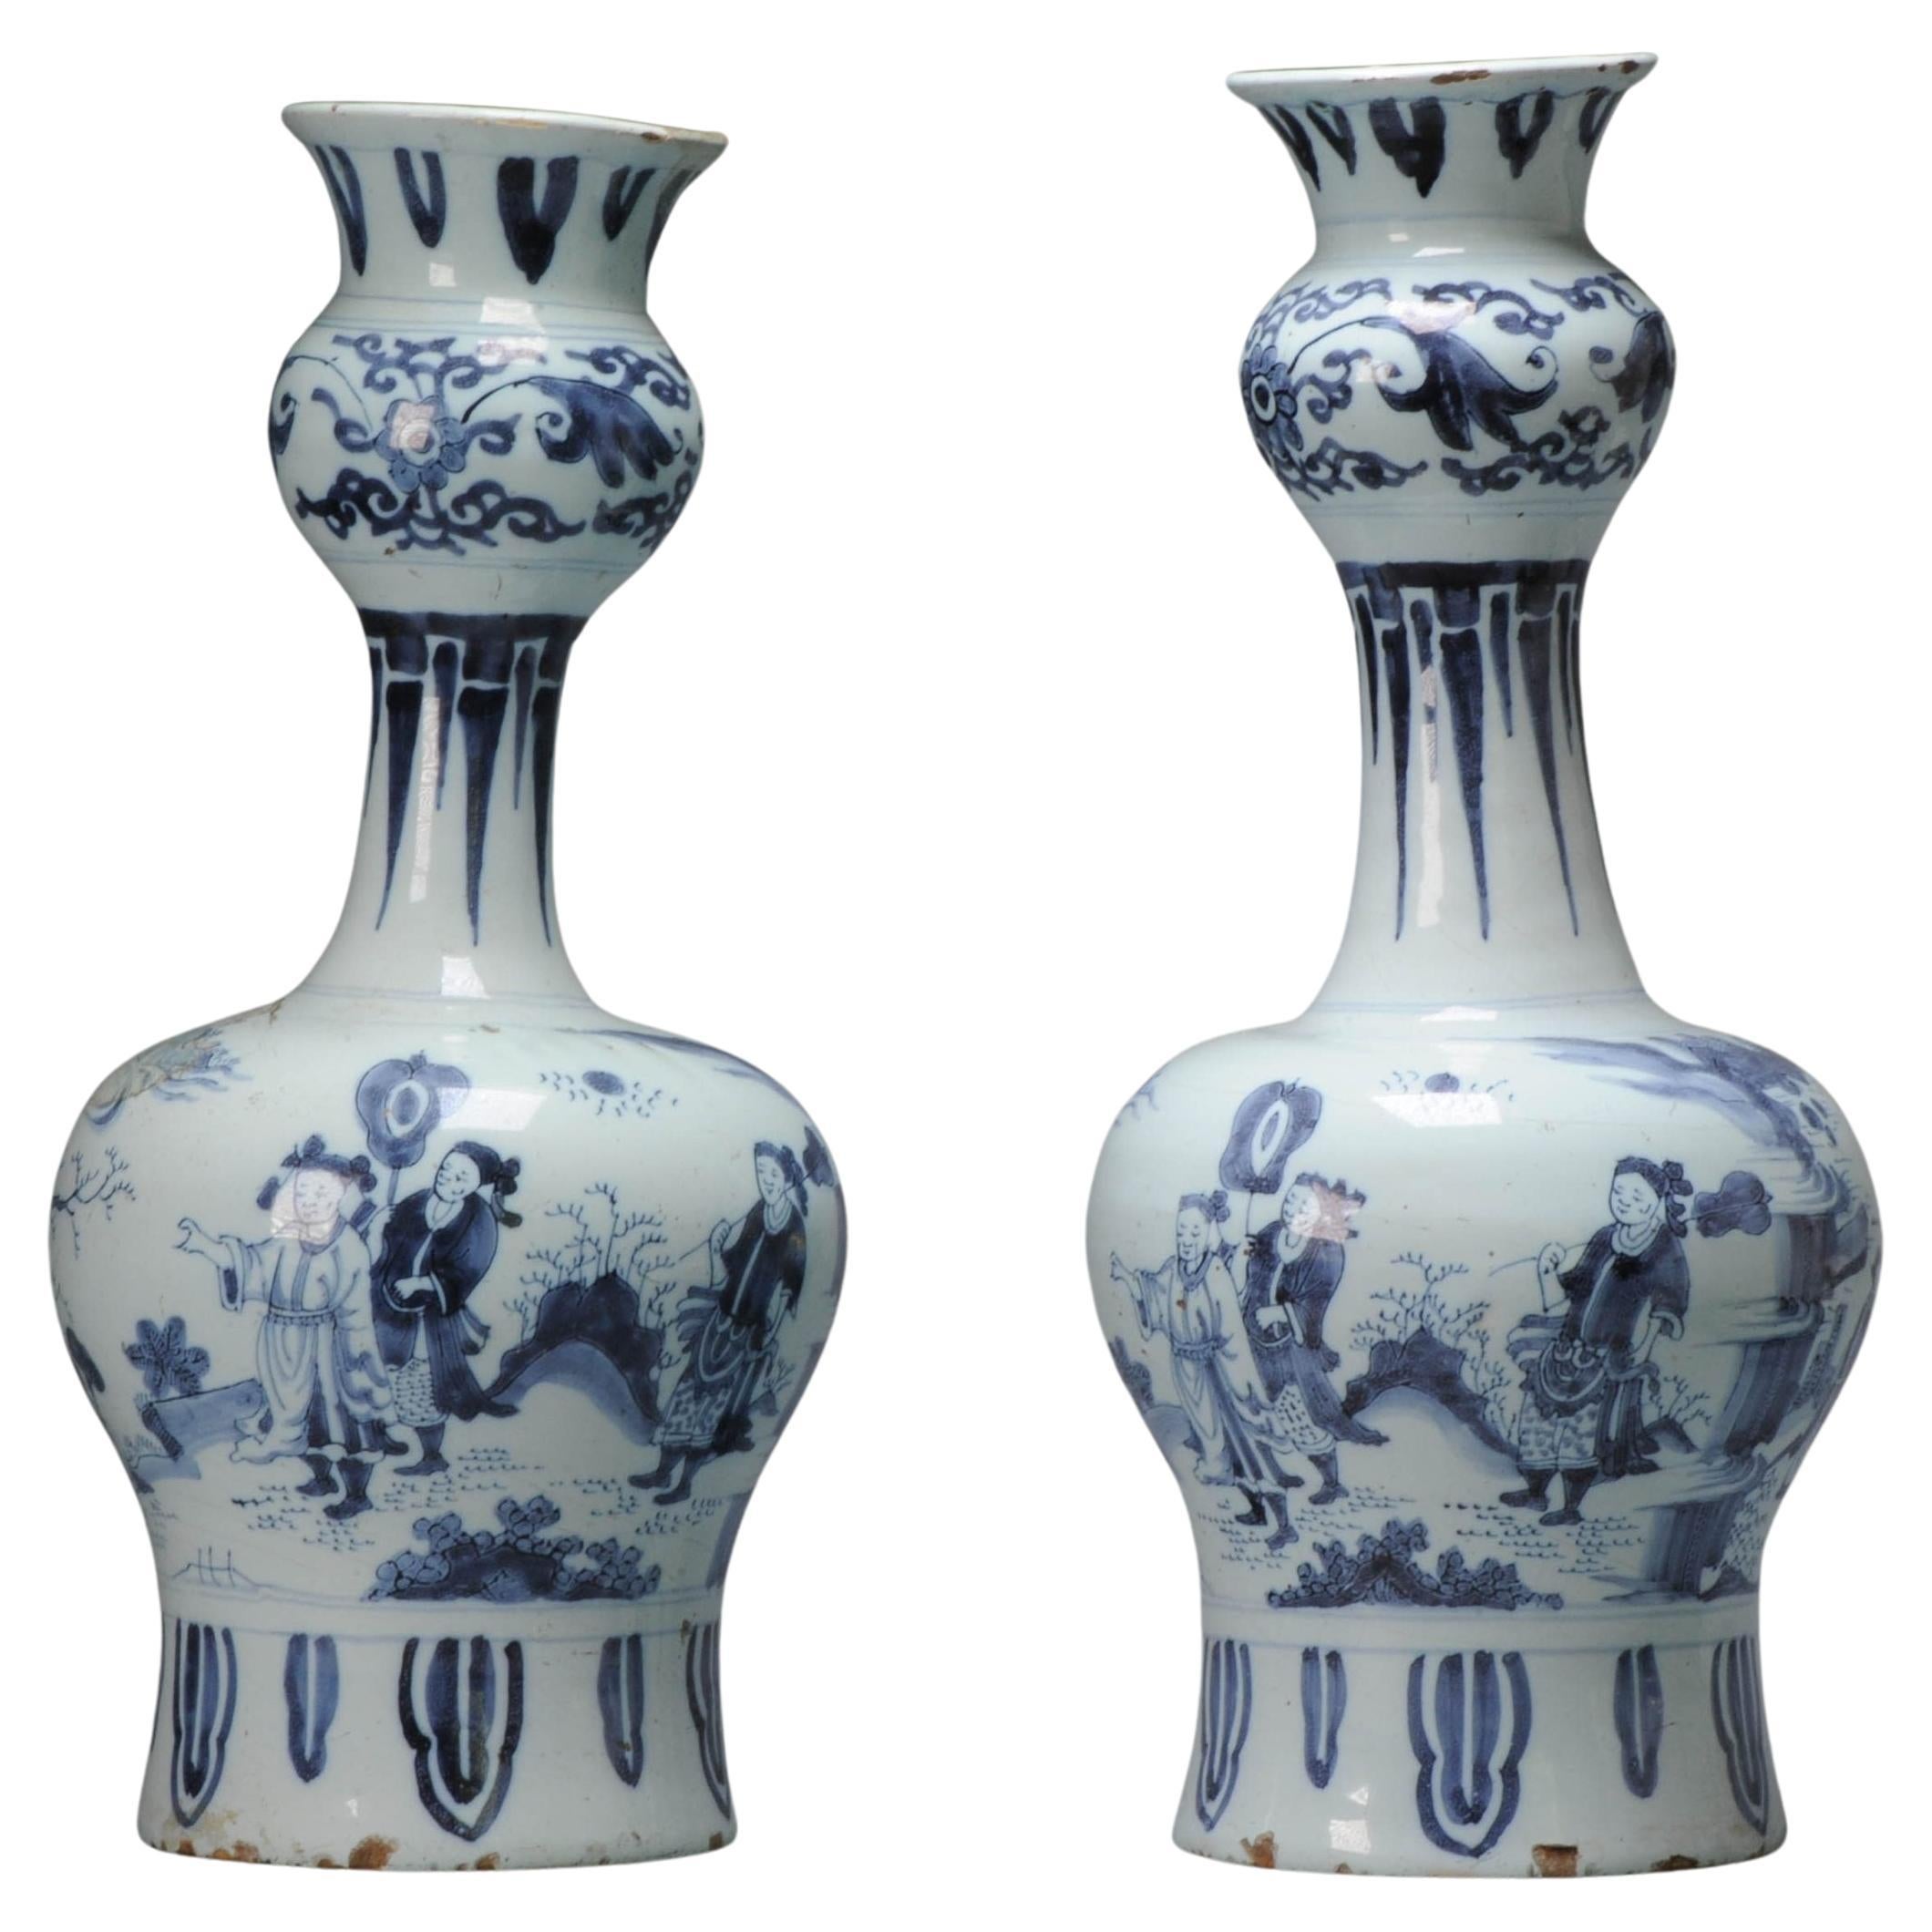 Unusual Dutch Delftware Figural Earthenware Vases in Chinese Transitional Style